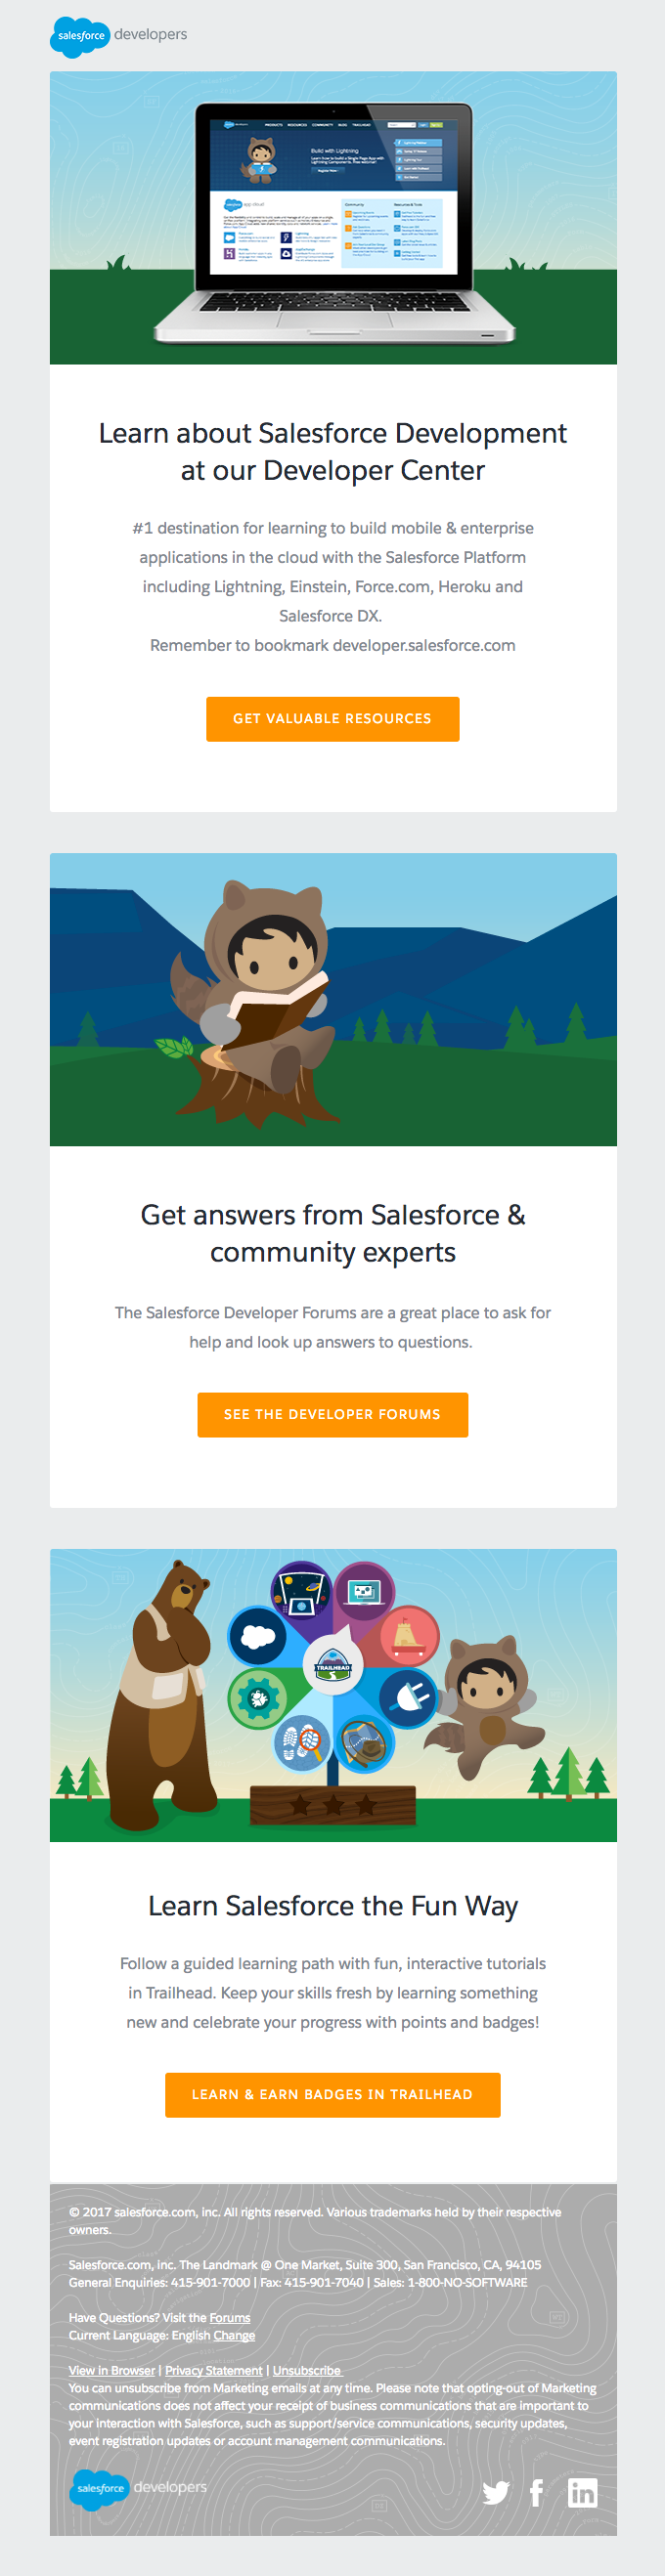 Bookmark these popular resources - Salesforce Email Newsletter